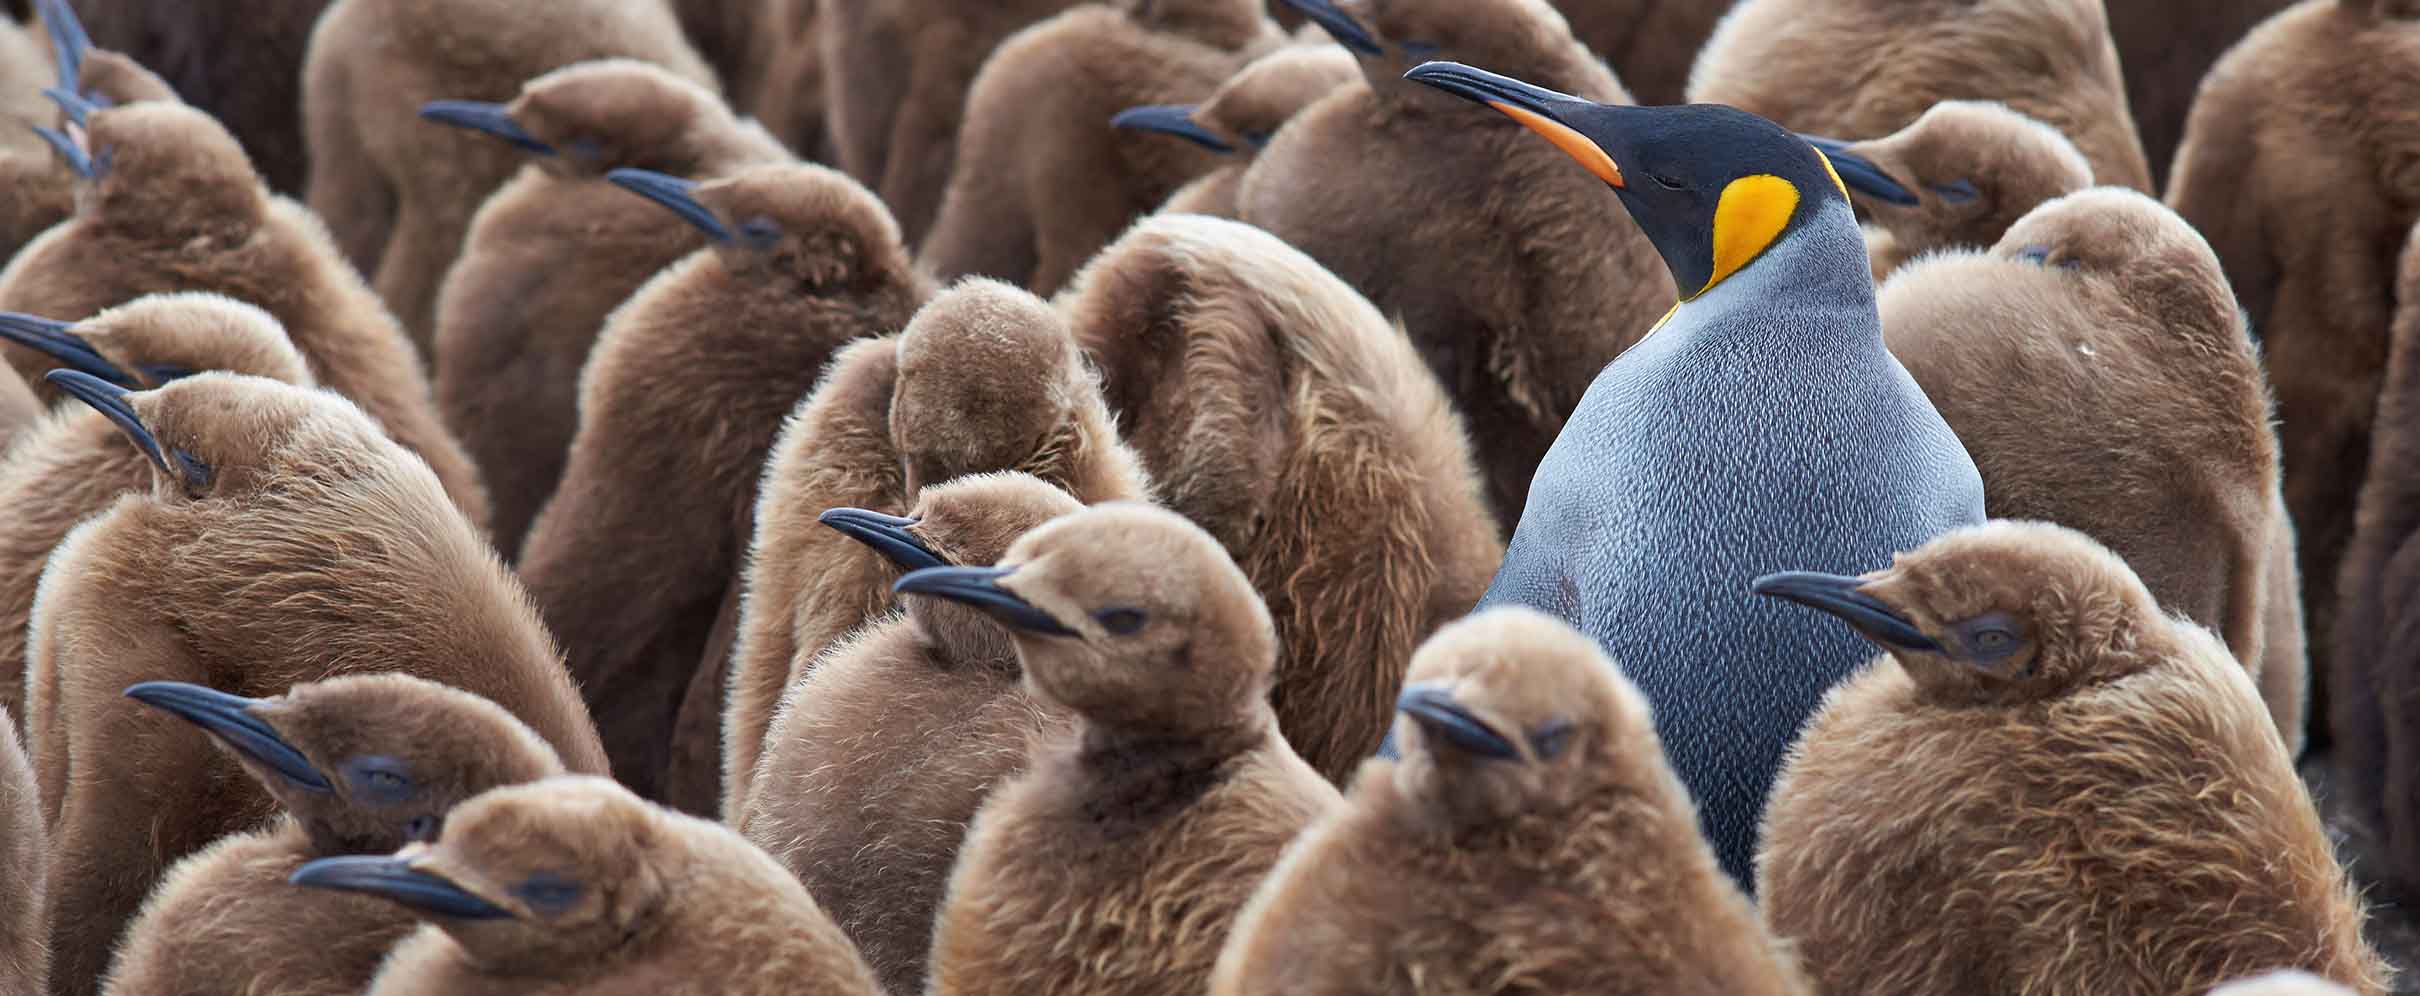 A gray and black penguin stands out from a group of brown penguins.